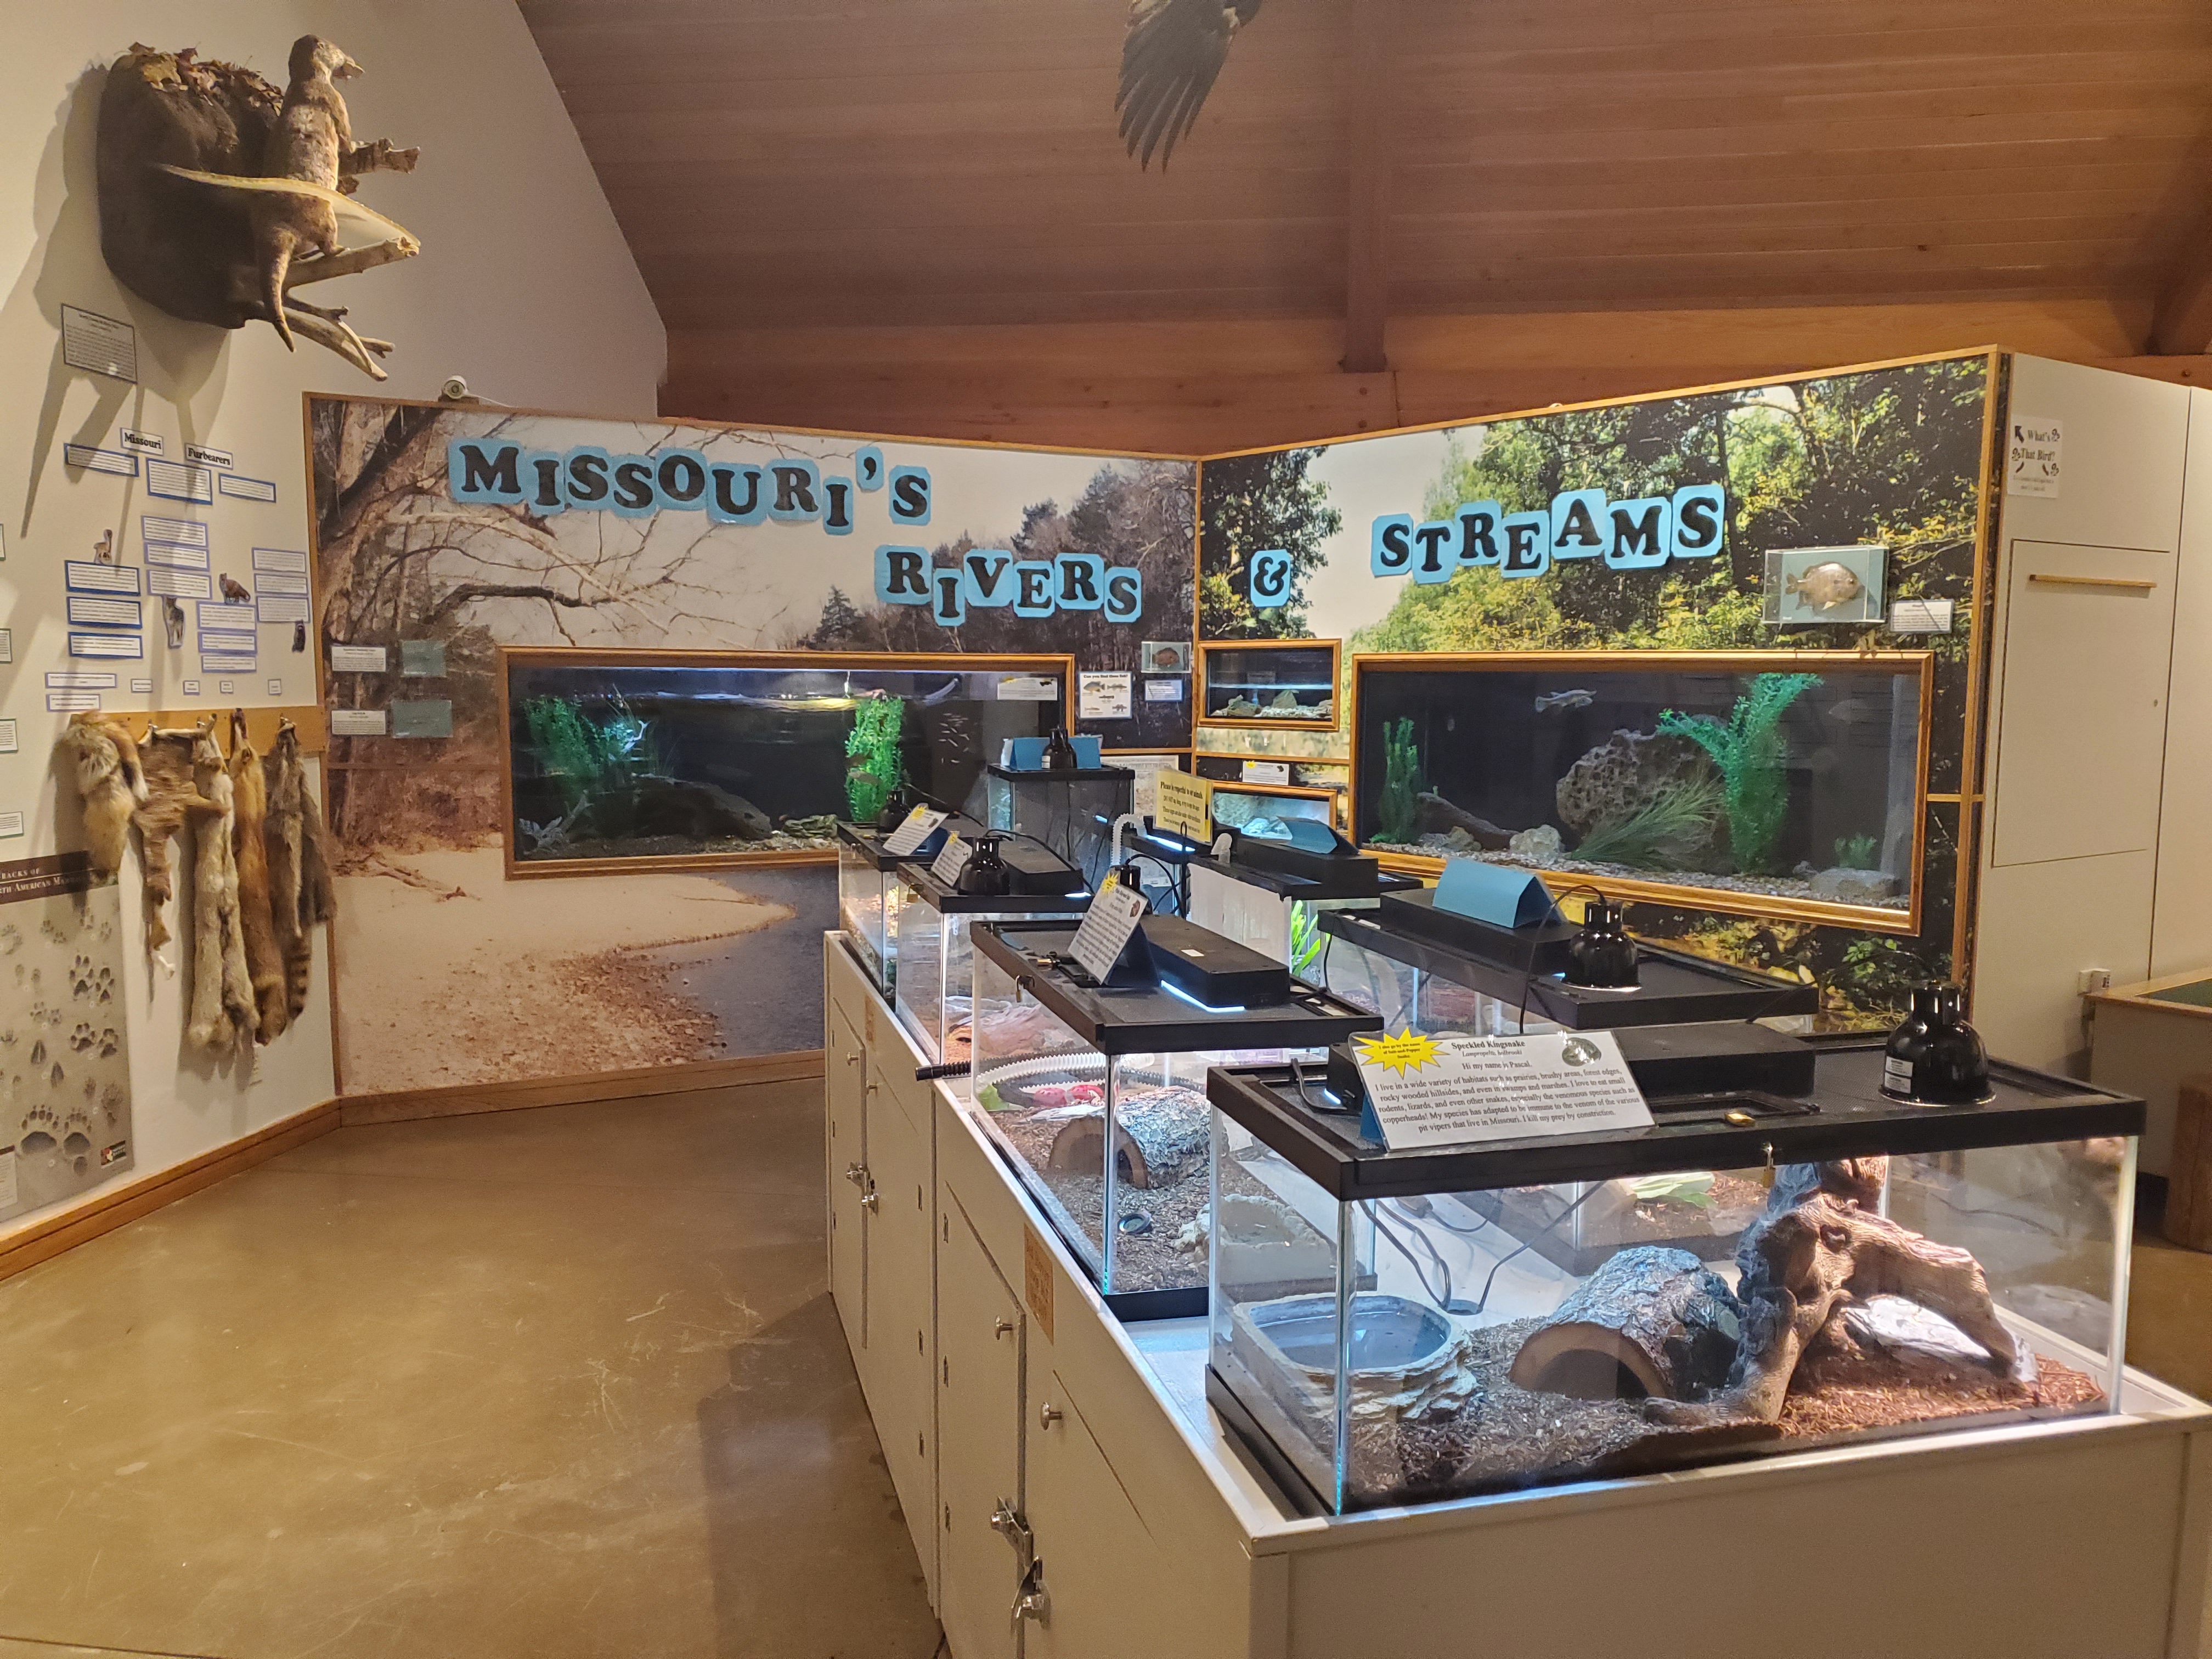 A room of interpretive displays, including animal furs, a diorama of Missouri streams and rivers, and reptile enclosures